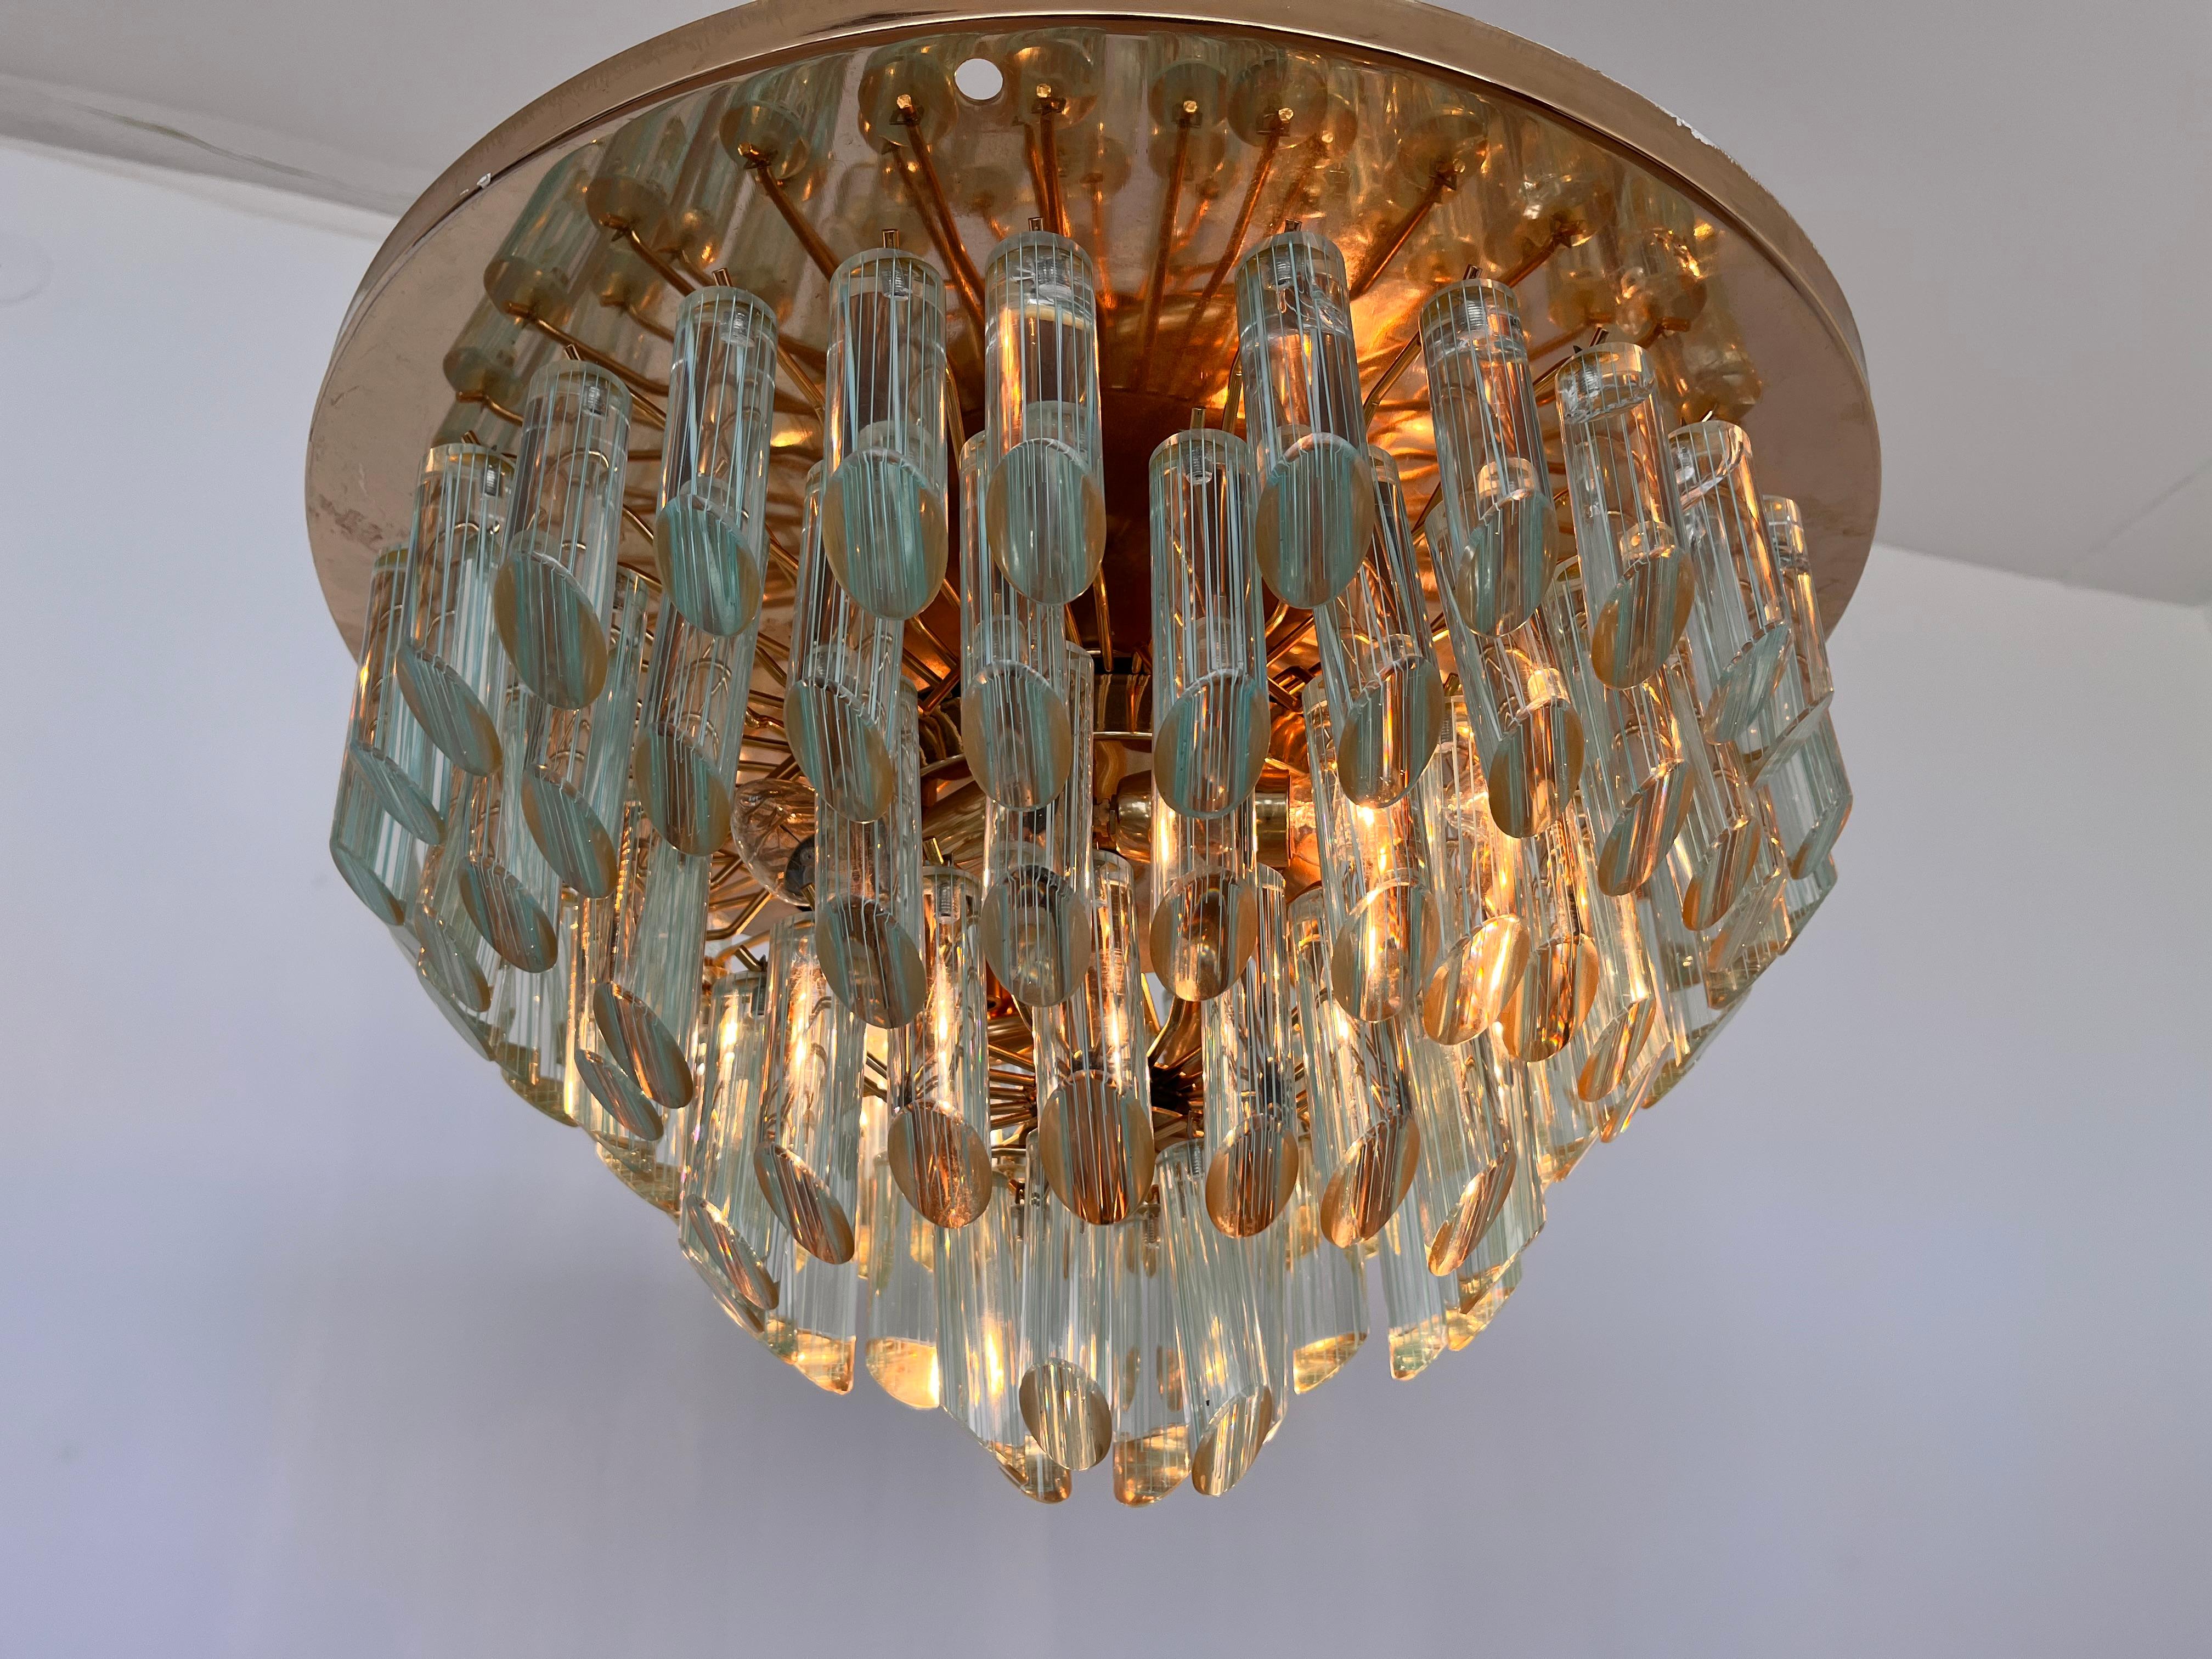 Italian XXL Murano Glass and brass Flush Mount/Ceiling Lamp by Venini for Isa - 1980s For Sale